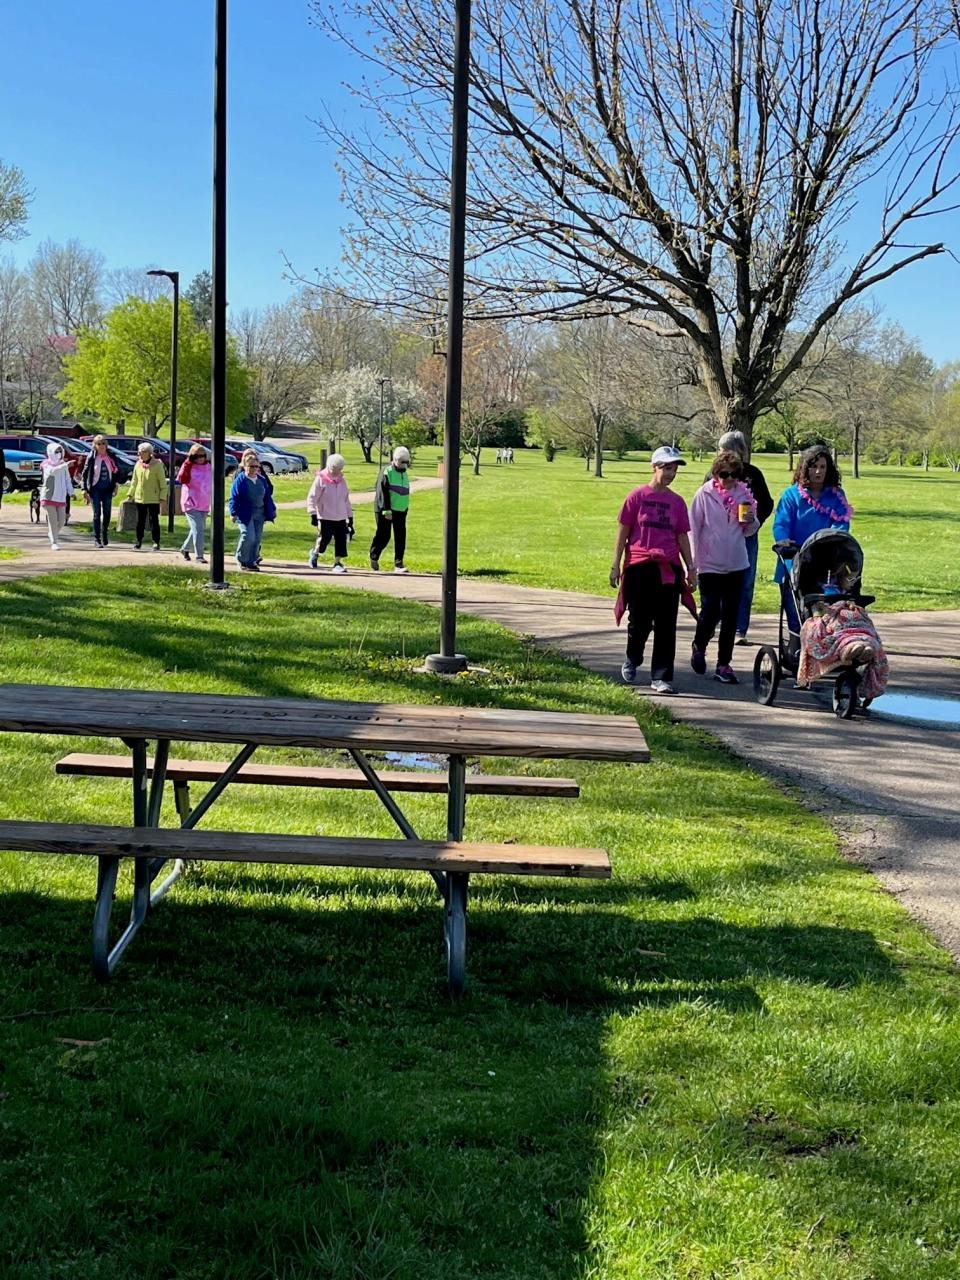 Those participating in the Fulton County Breast Cancer Support Group Walk at Wallace Park included survivors, caregivers and for those walking in memory of loved ones.